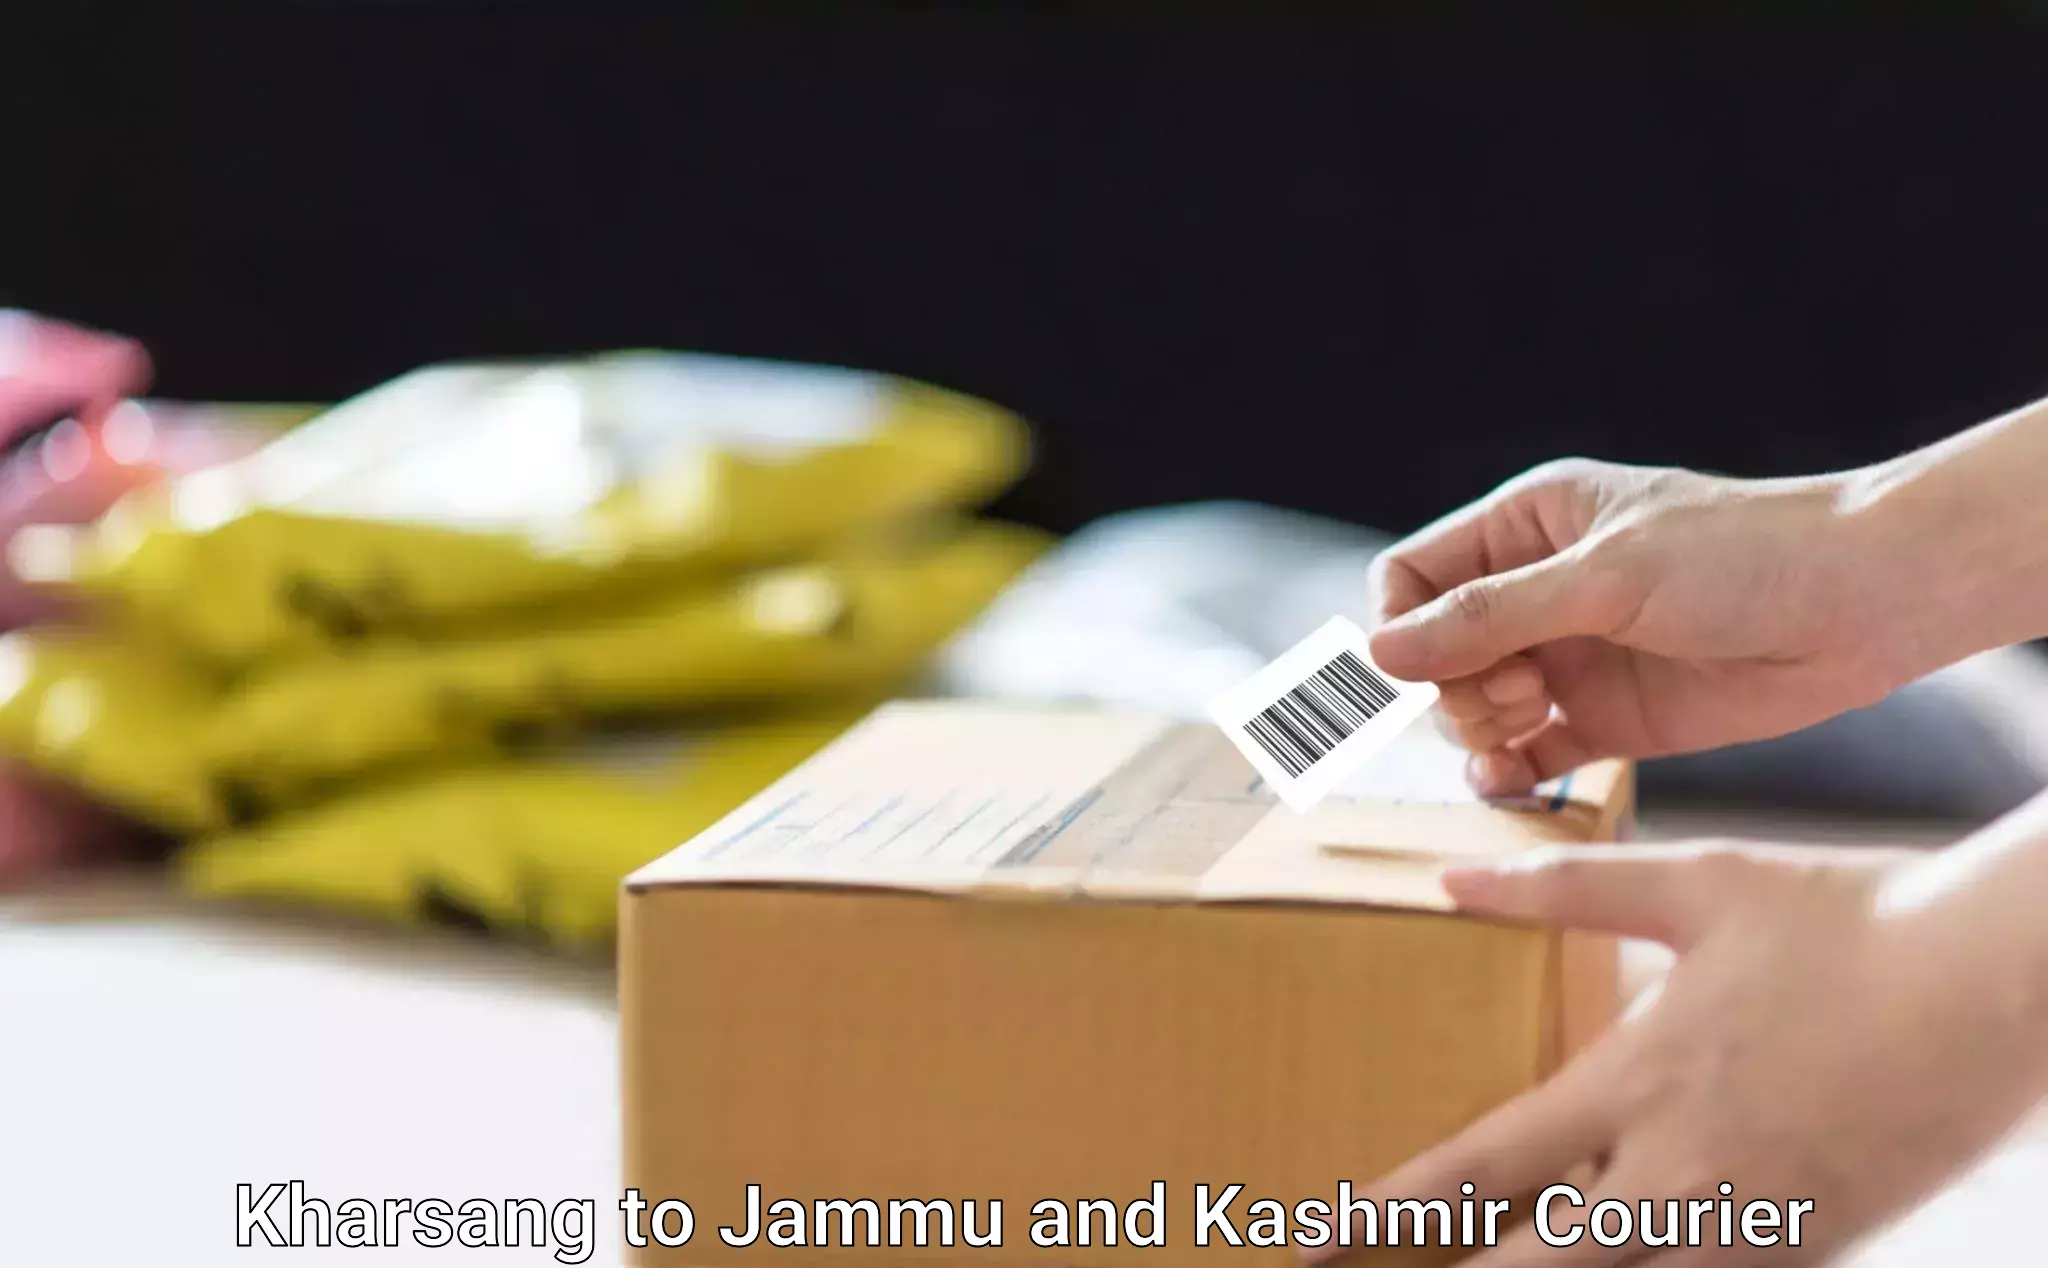 State-of-the-art courier technology Kharsang to Jammu and Kashmir